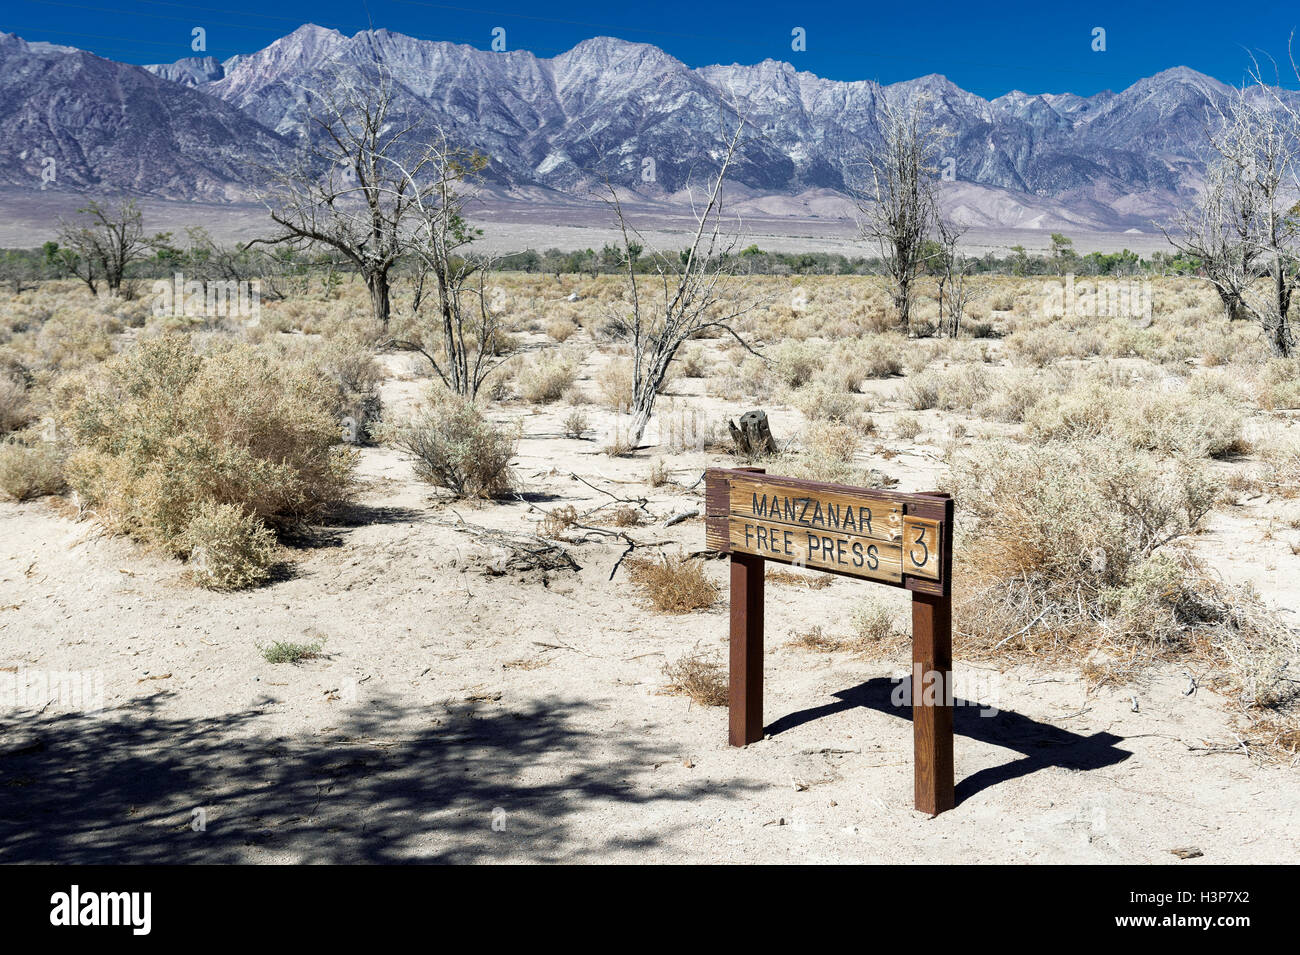 Manzanar Free Press, Manzanar national historic site where 110 Japanese Americans were relocated during WWII. Stock Photo